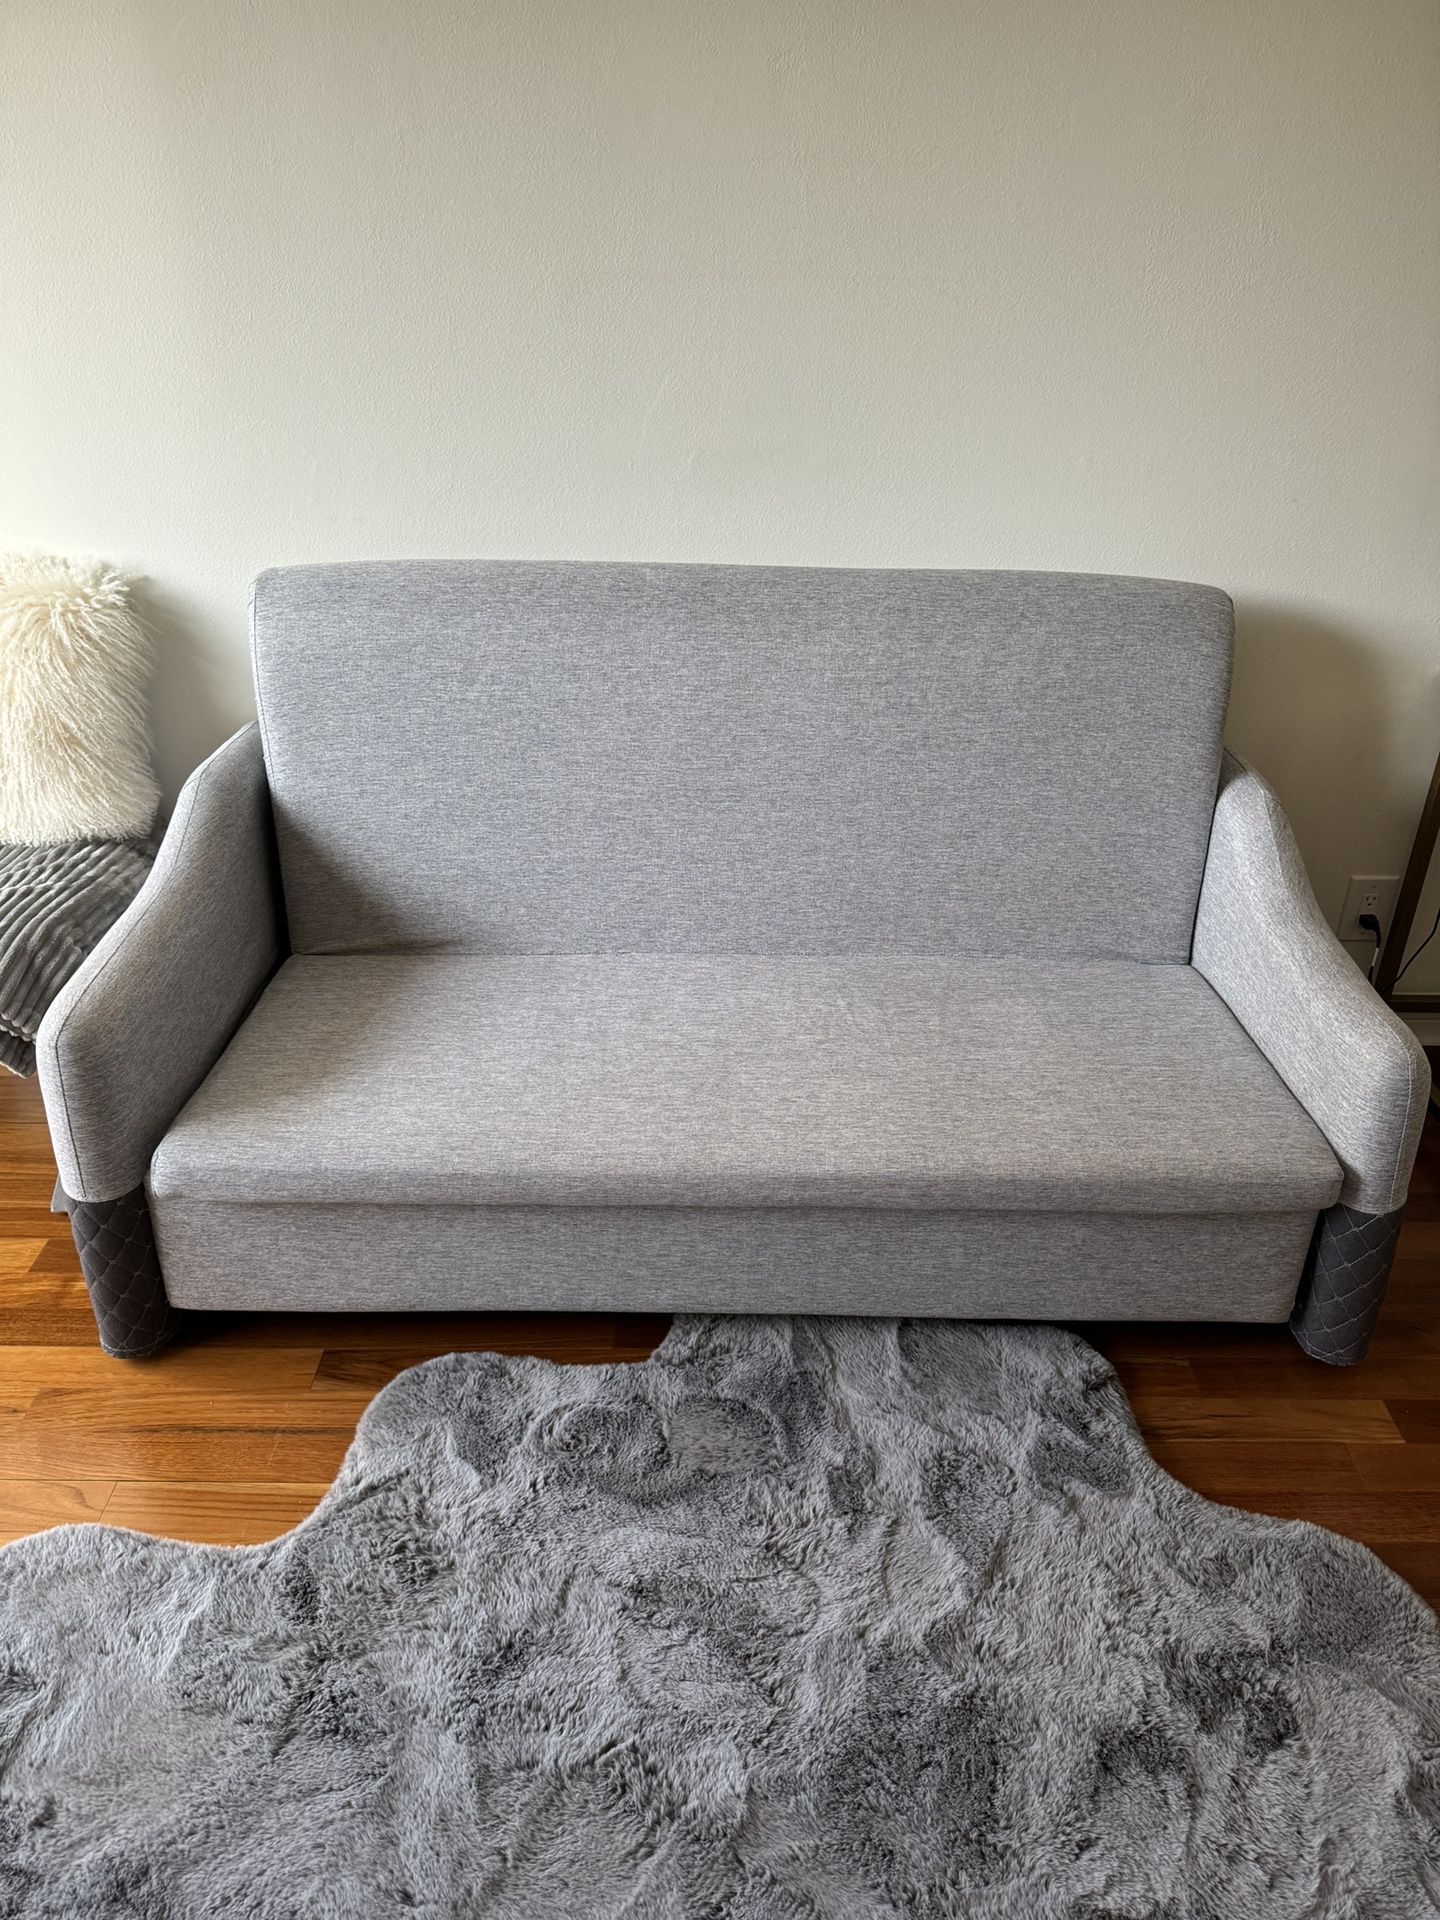 Pull Out Sofa Bed Full Size. 